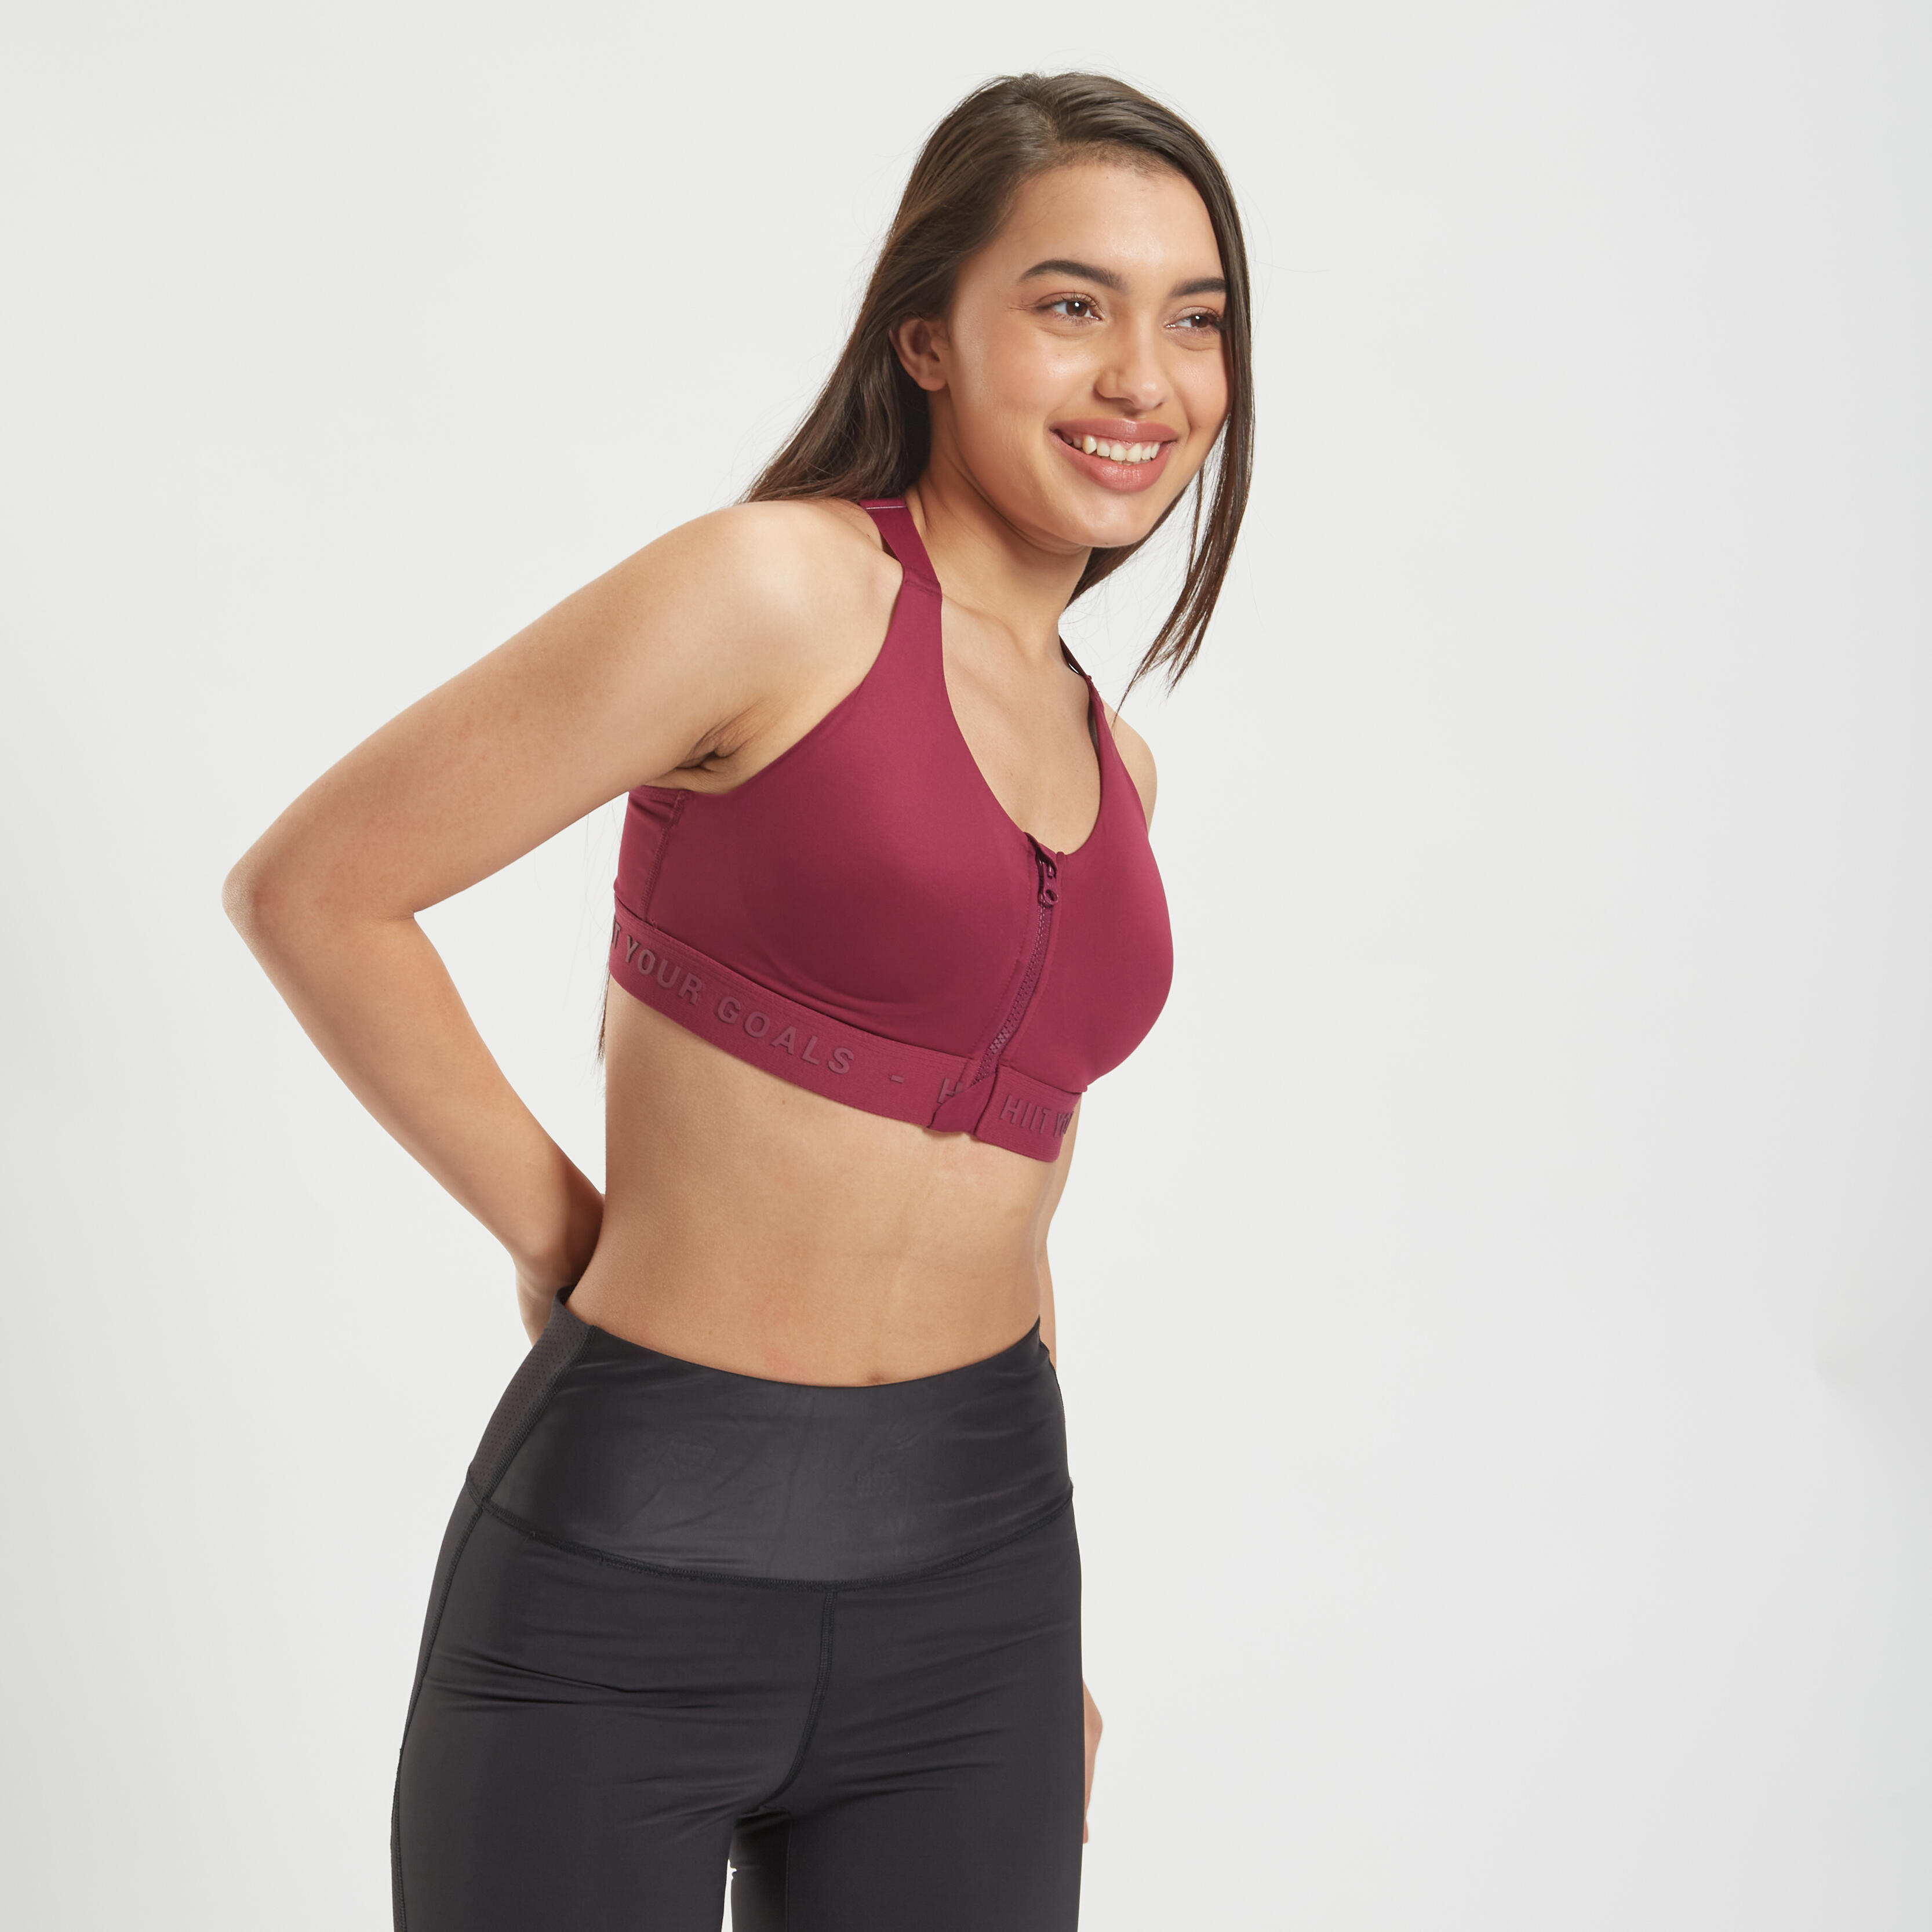 Domyos By Decathlon Maroon Padded High Support Fitness Sports Bra Price in  India, Full Specifications & Offers